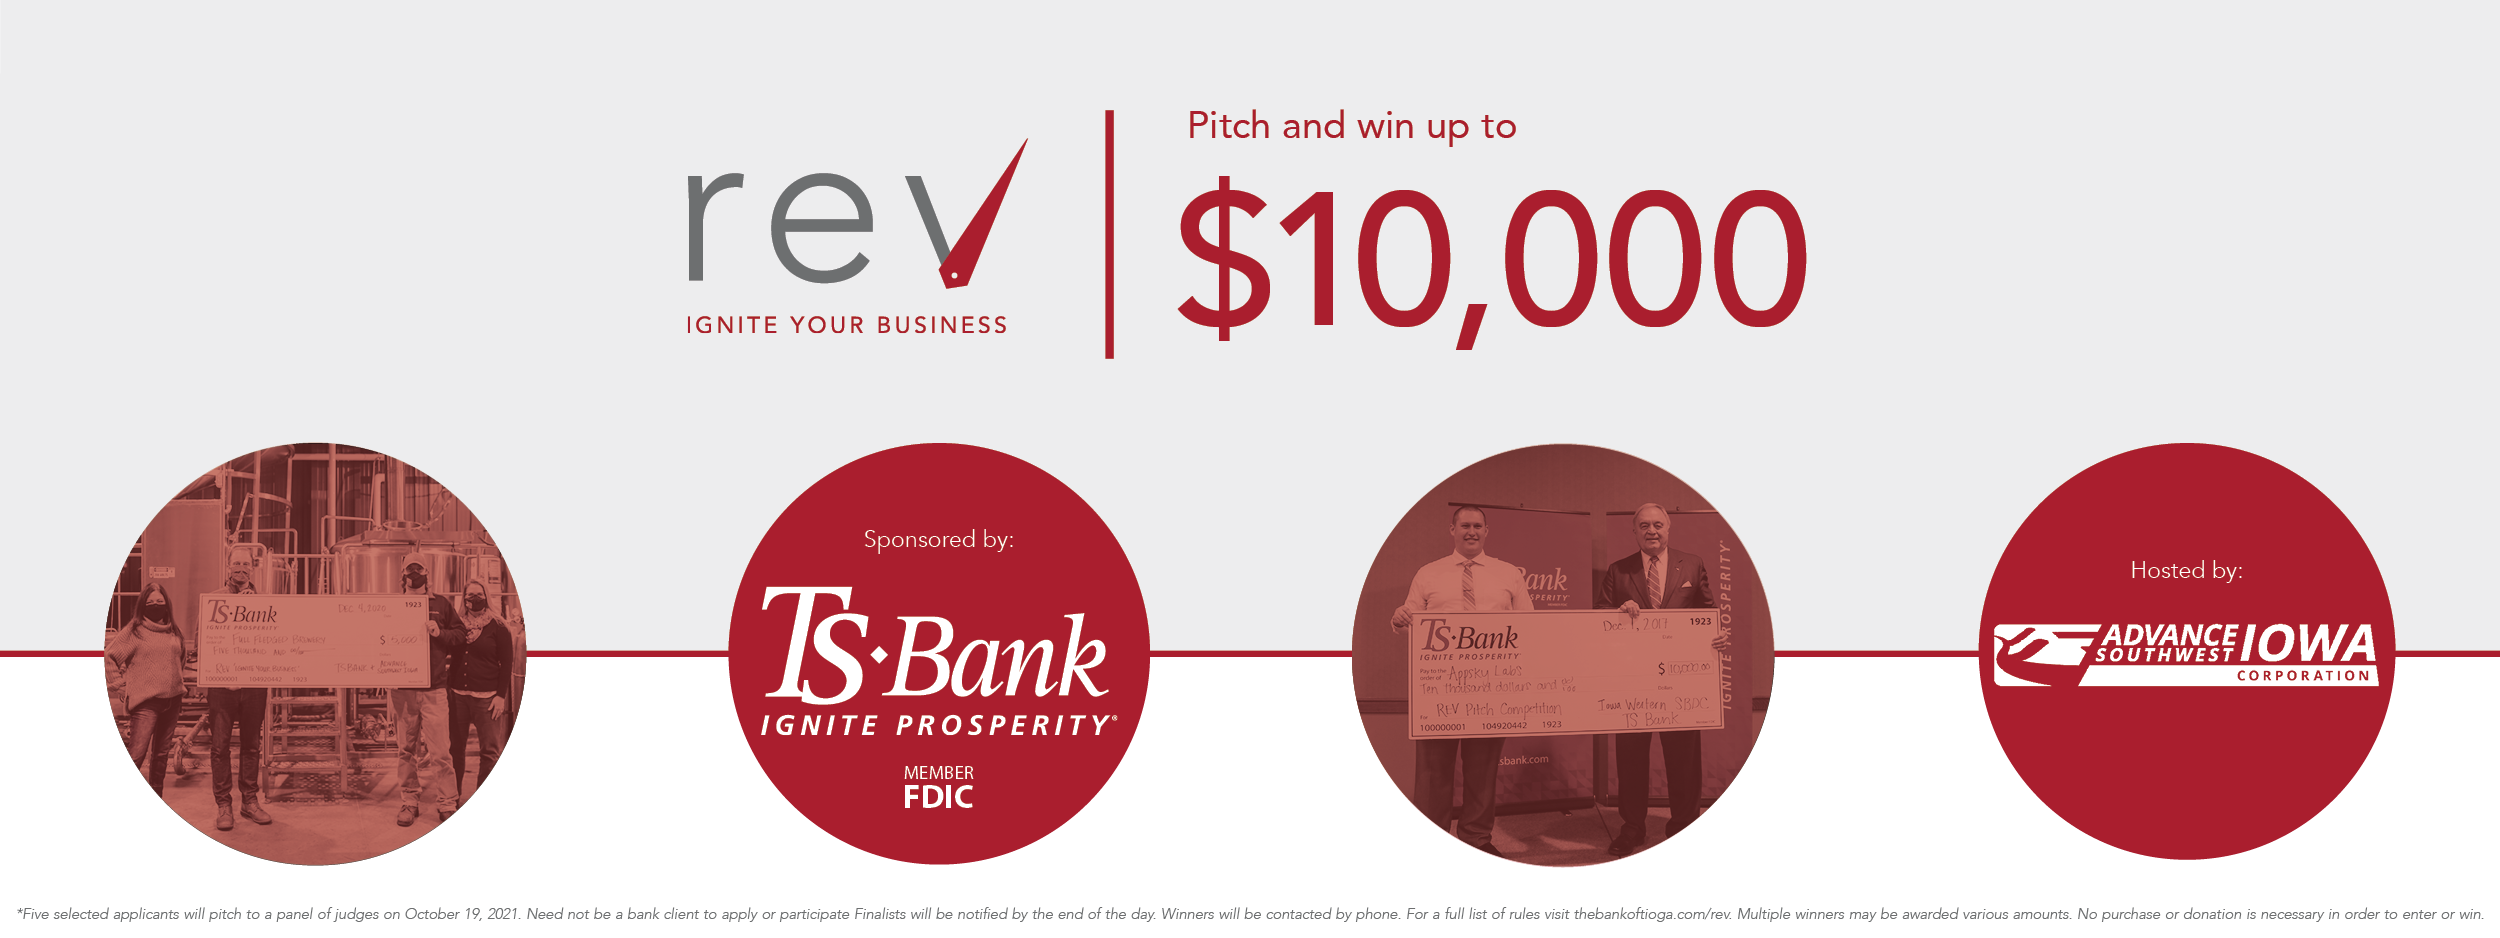 REV ignite your business, pitch and win up to $10,000. 